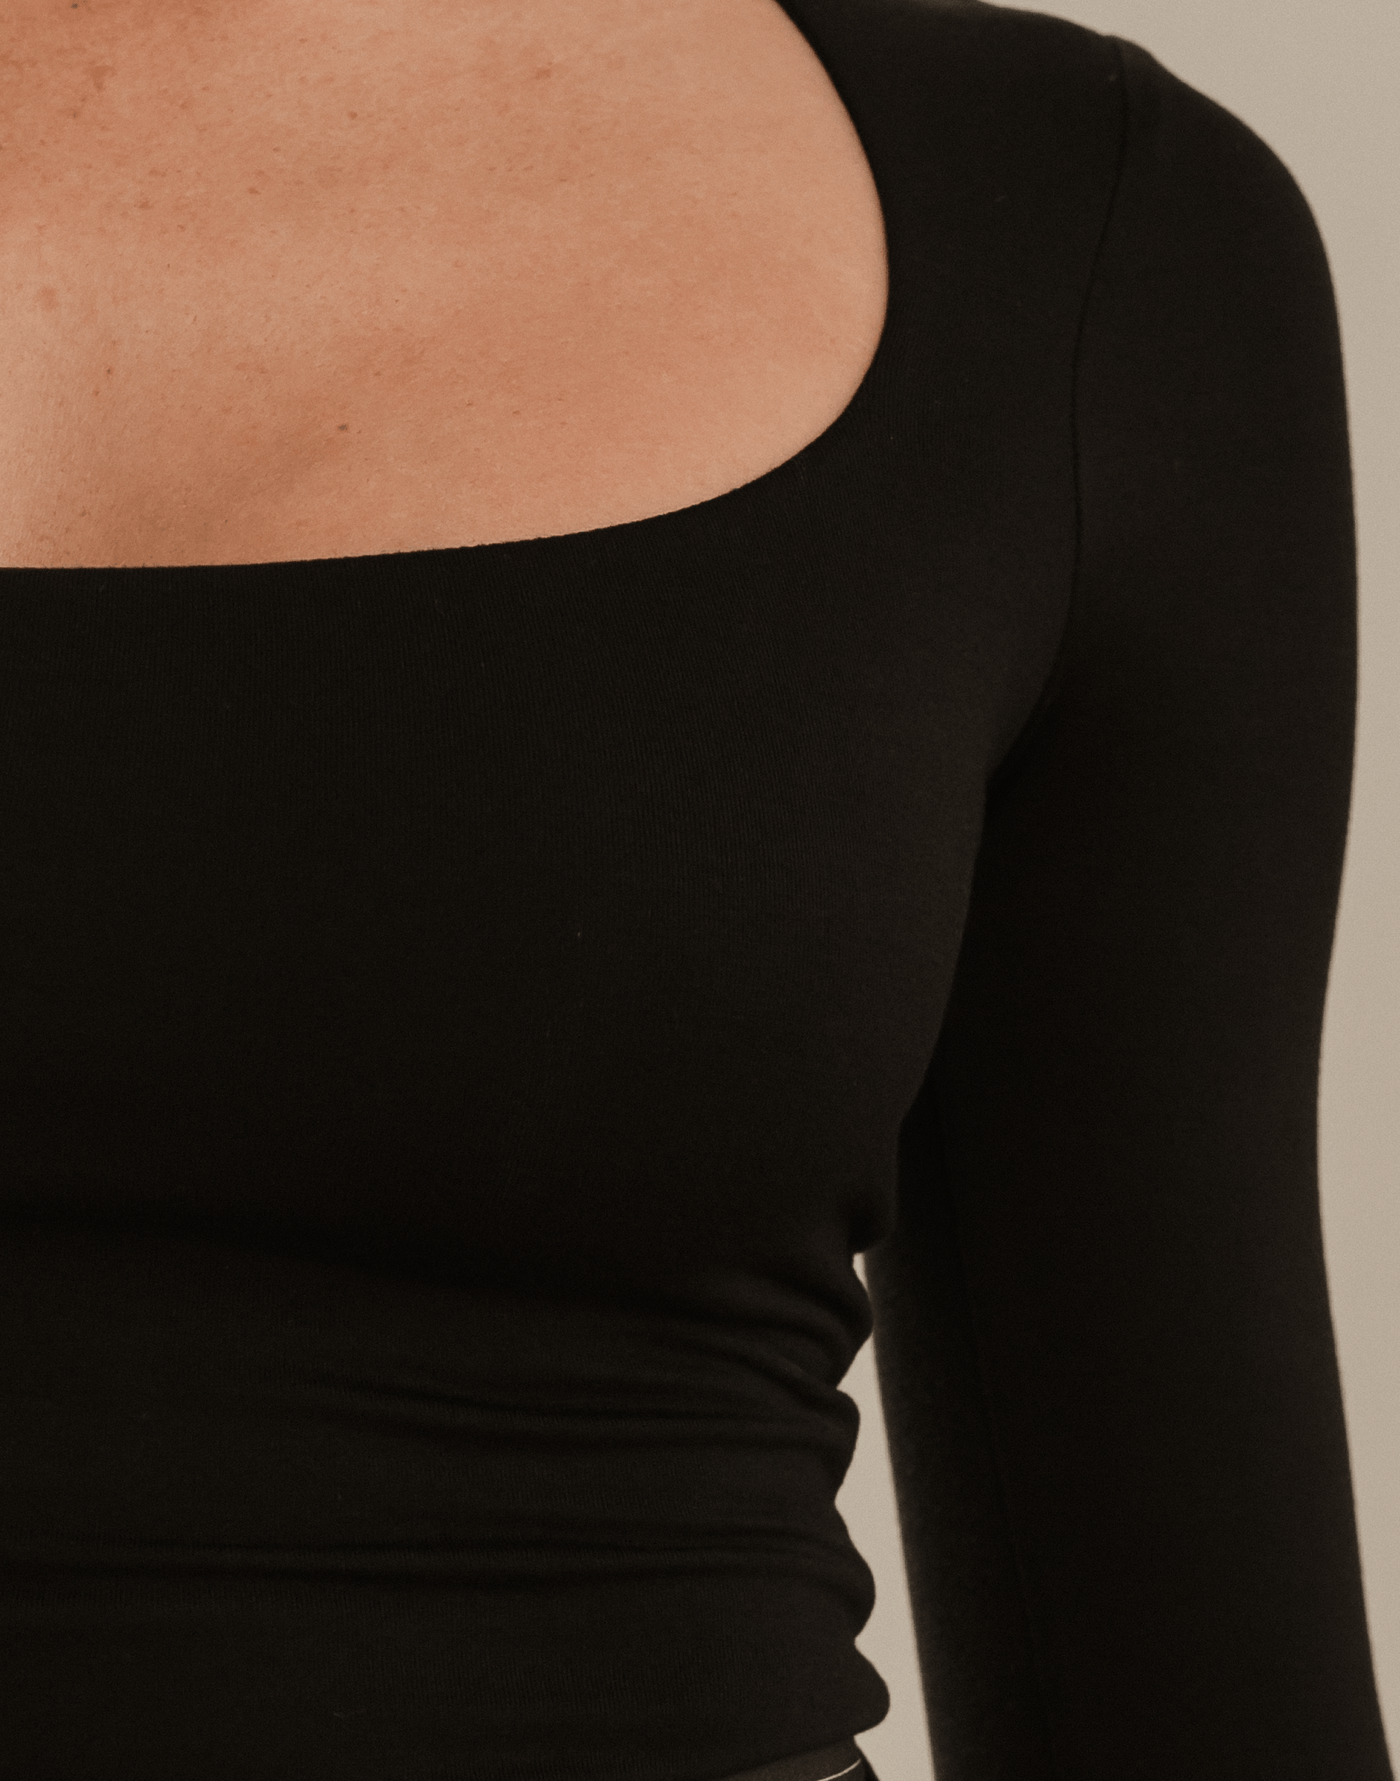 Clary Top (Black) - Black Long Sleeve Top - Women's Top - Charcoal Clothing